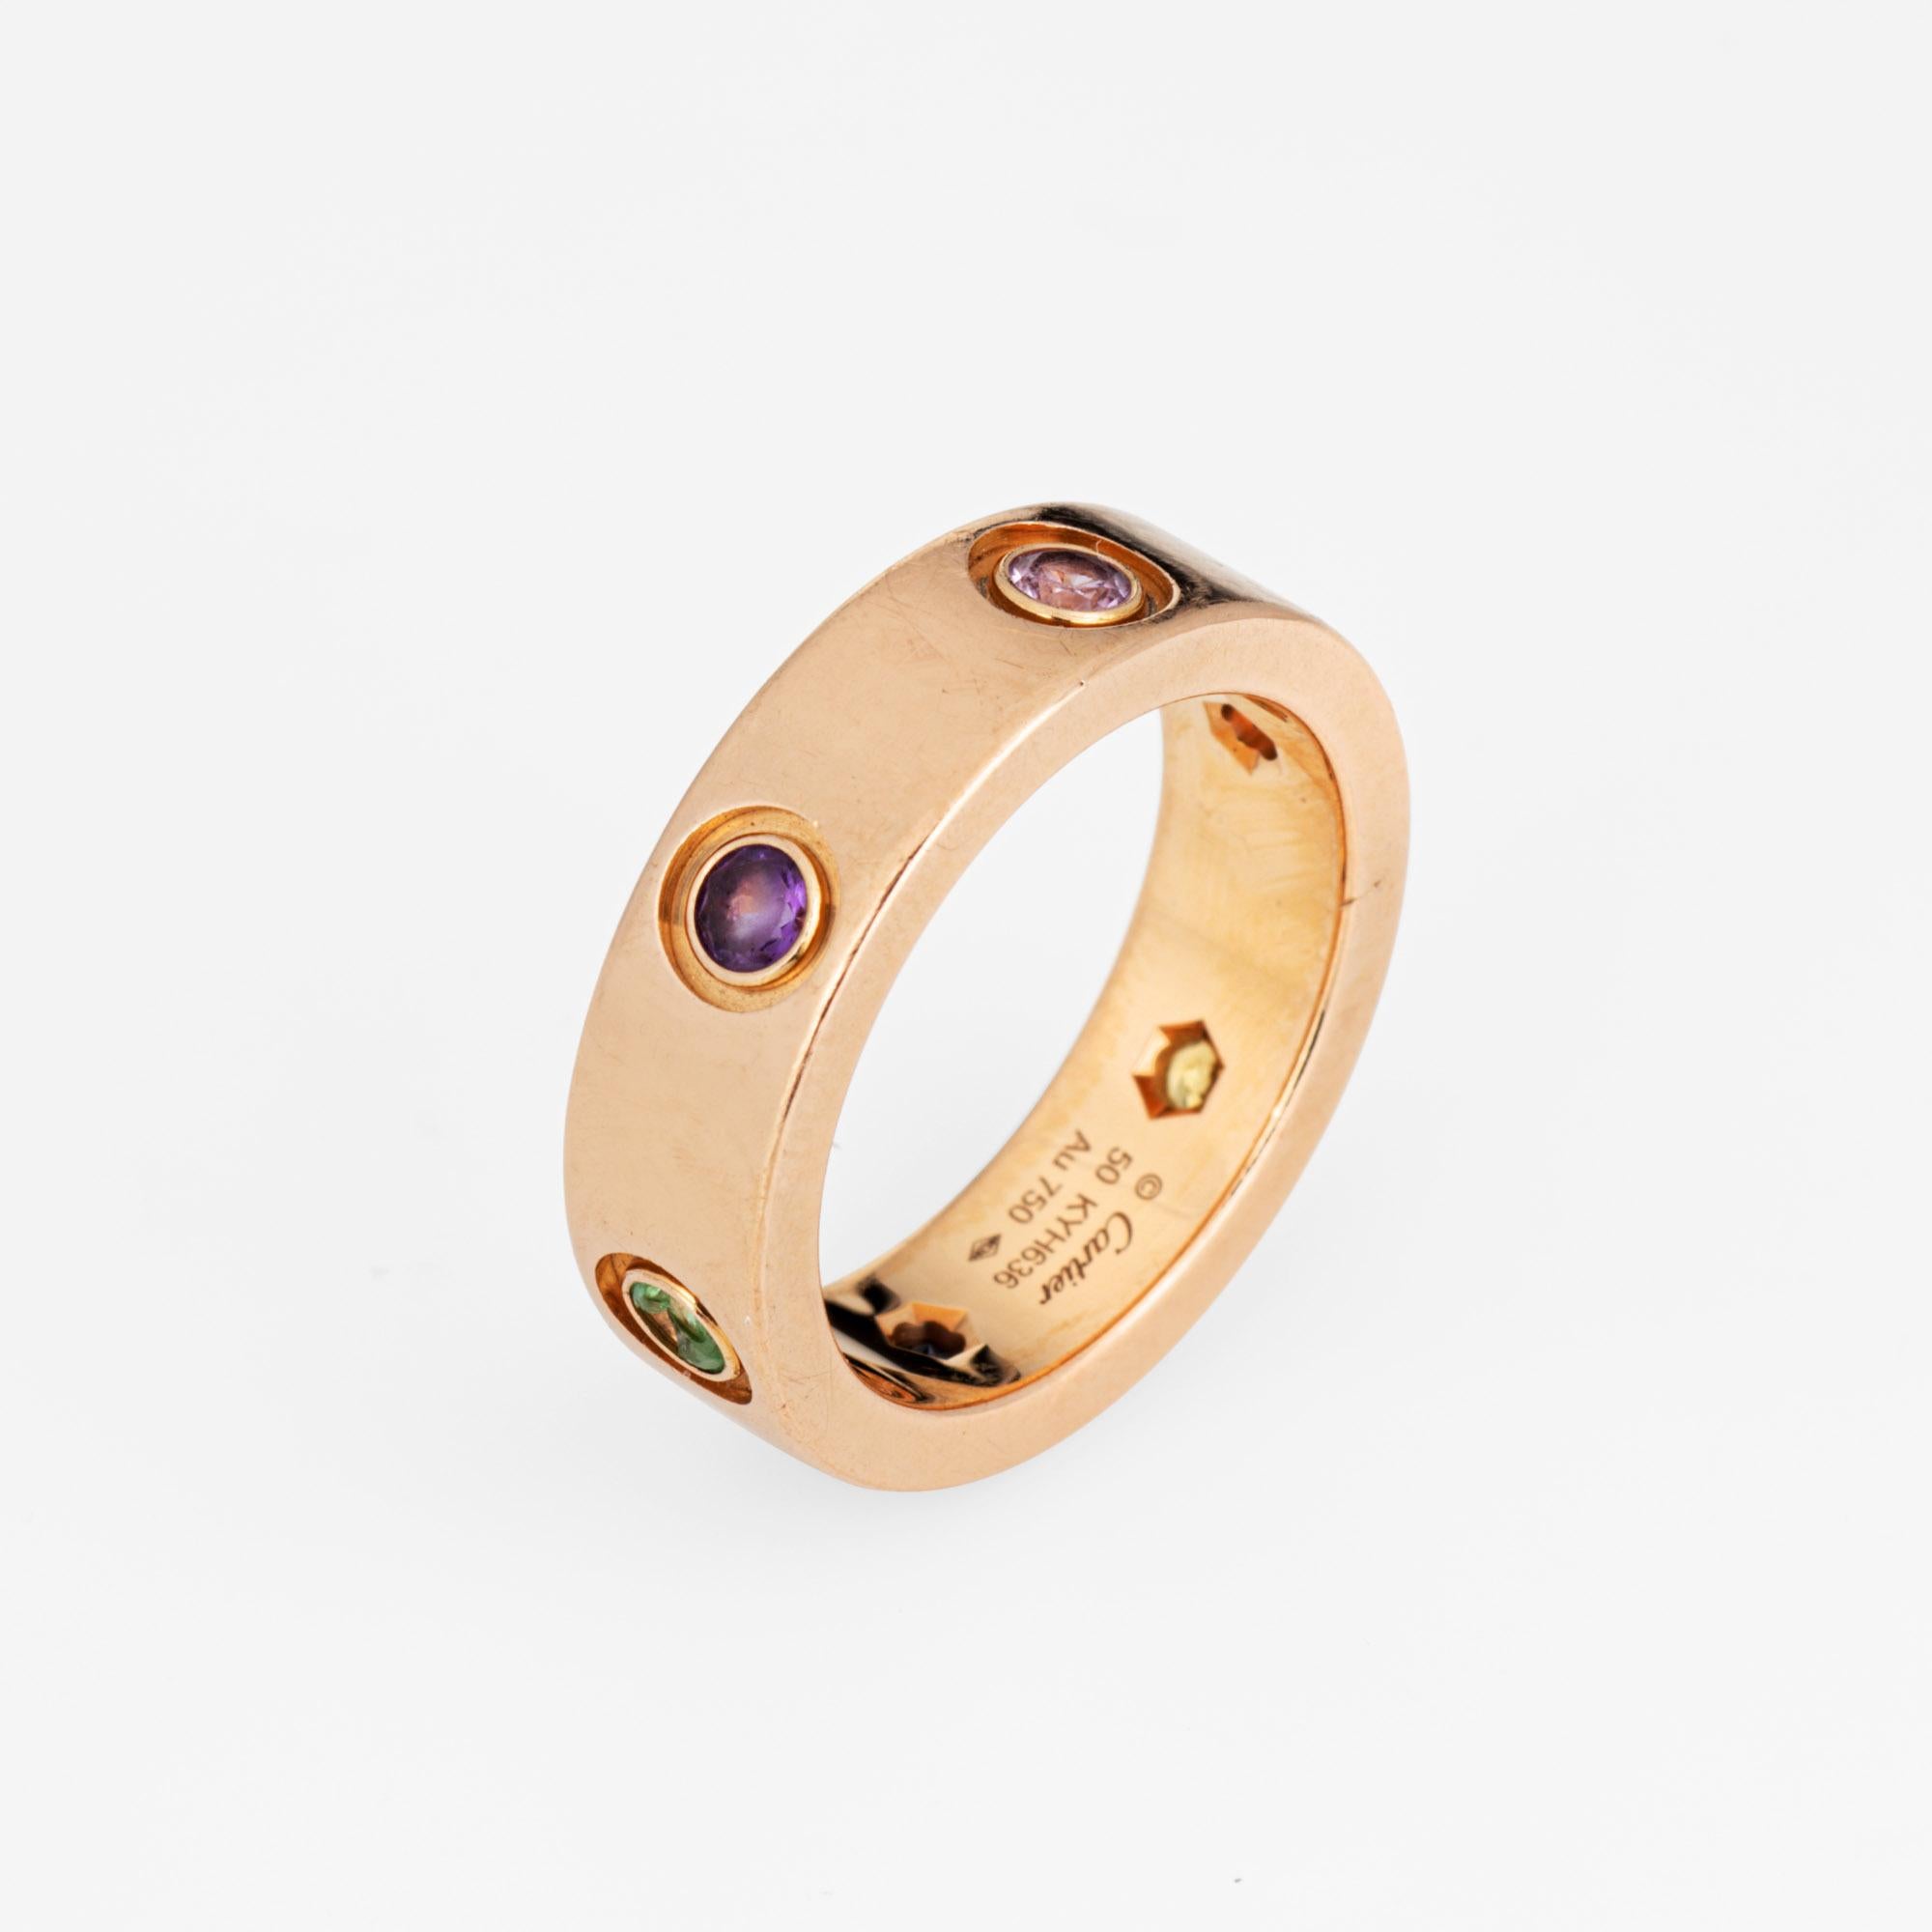 Pre owned Cartier gemstone Love ring crafted in 18 karat rose gold.  

Pink, blue and yellow sapphires along with green & orange garnets & amethyst measure approx. 2mm each. Note: the gemstones show signs of wear including surface abrasions and